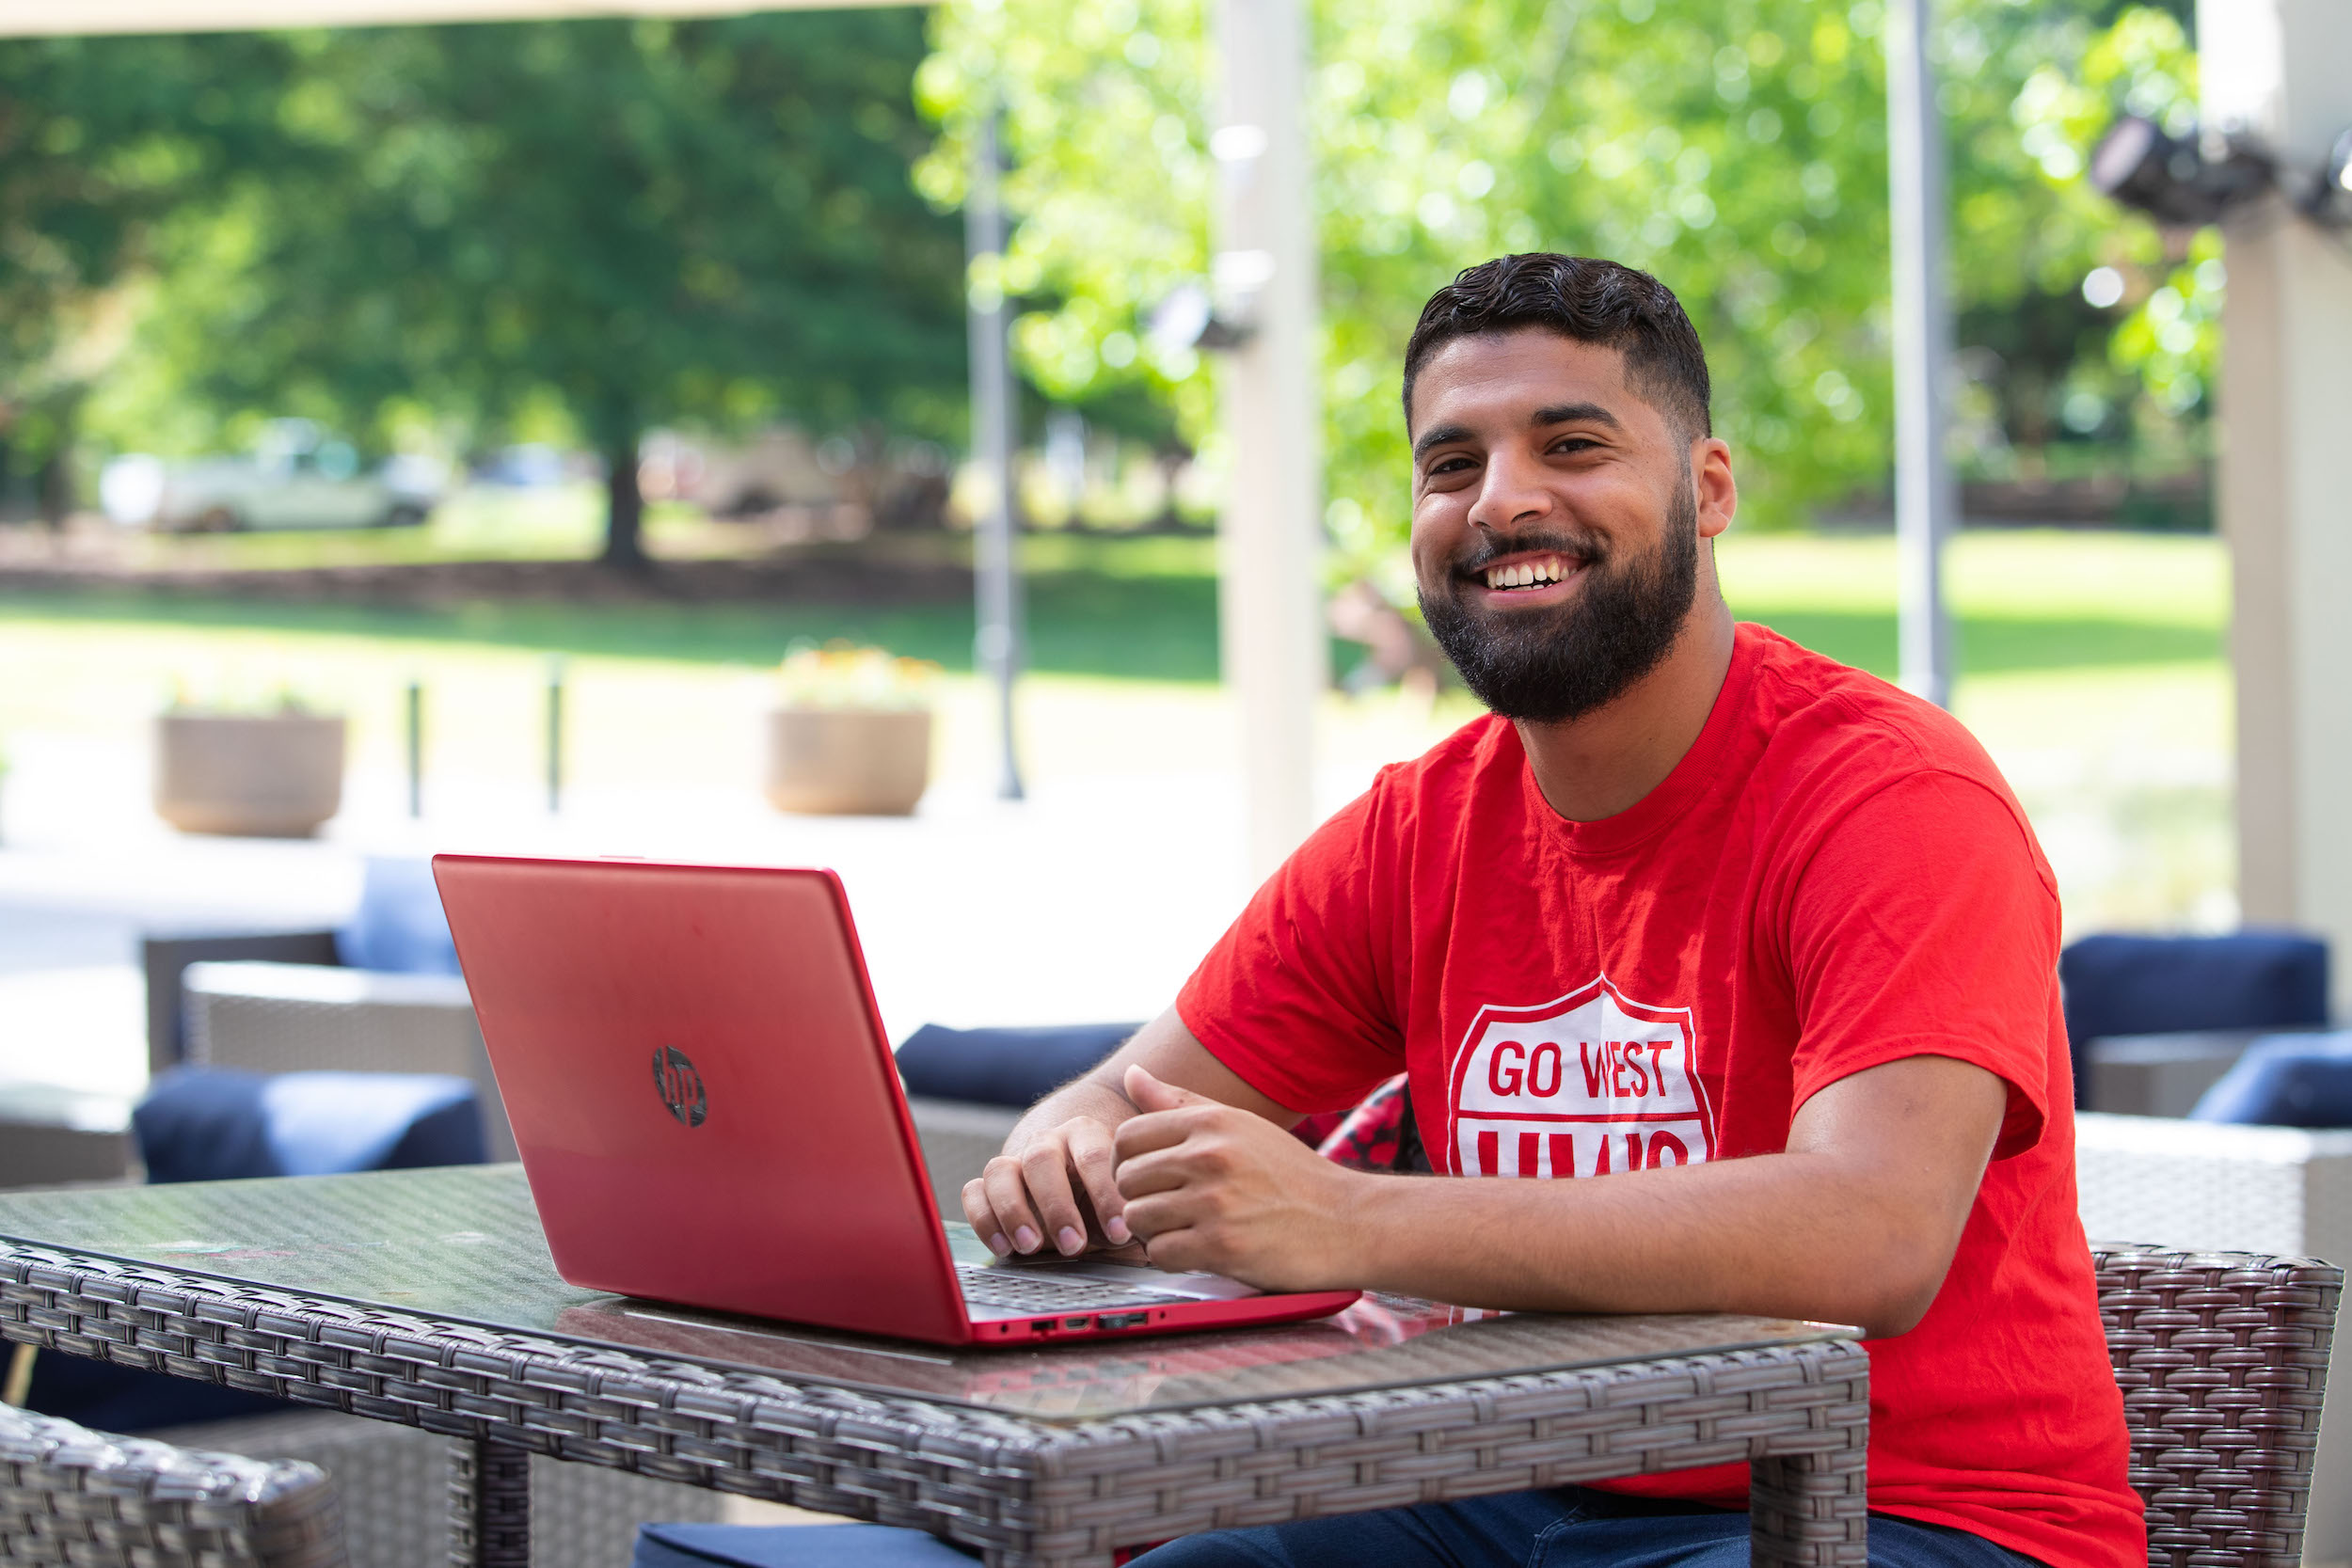 Male student smiling outside with red laptop.